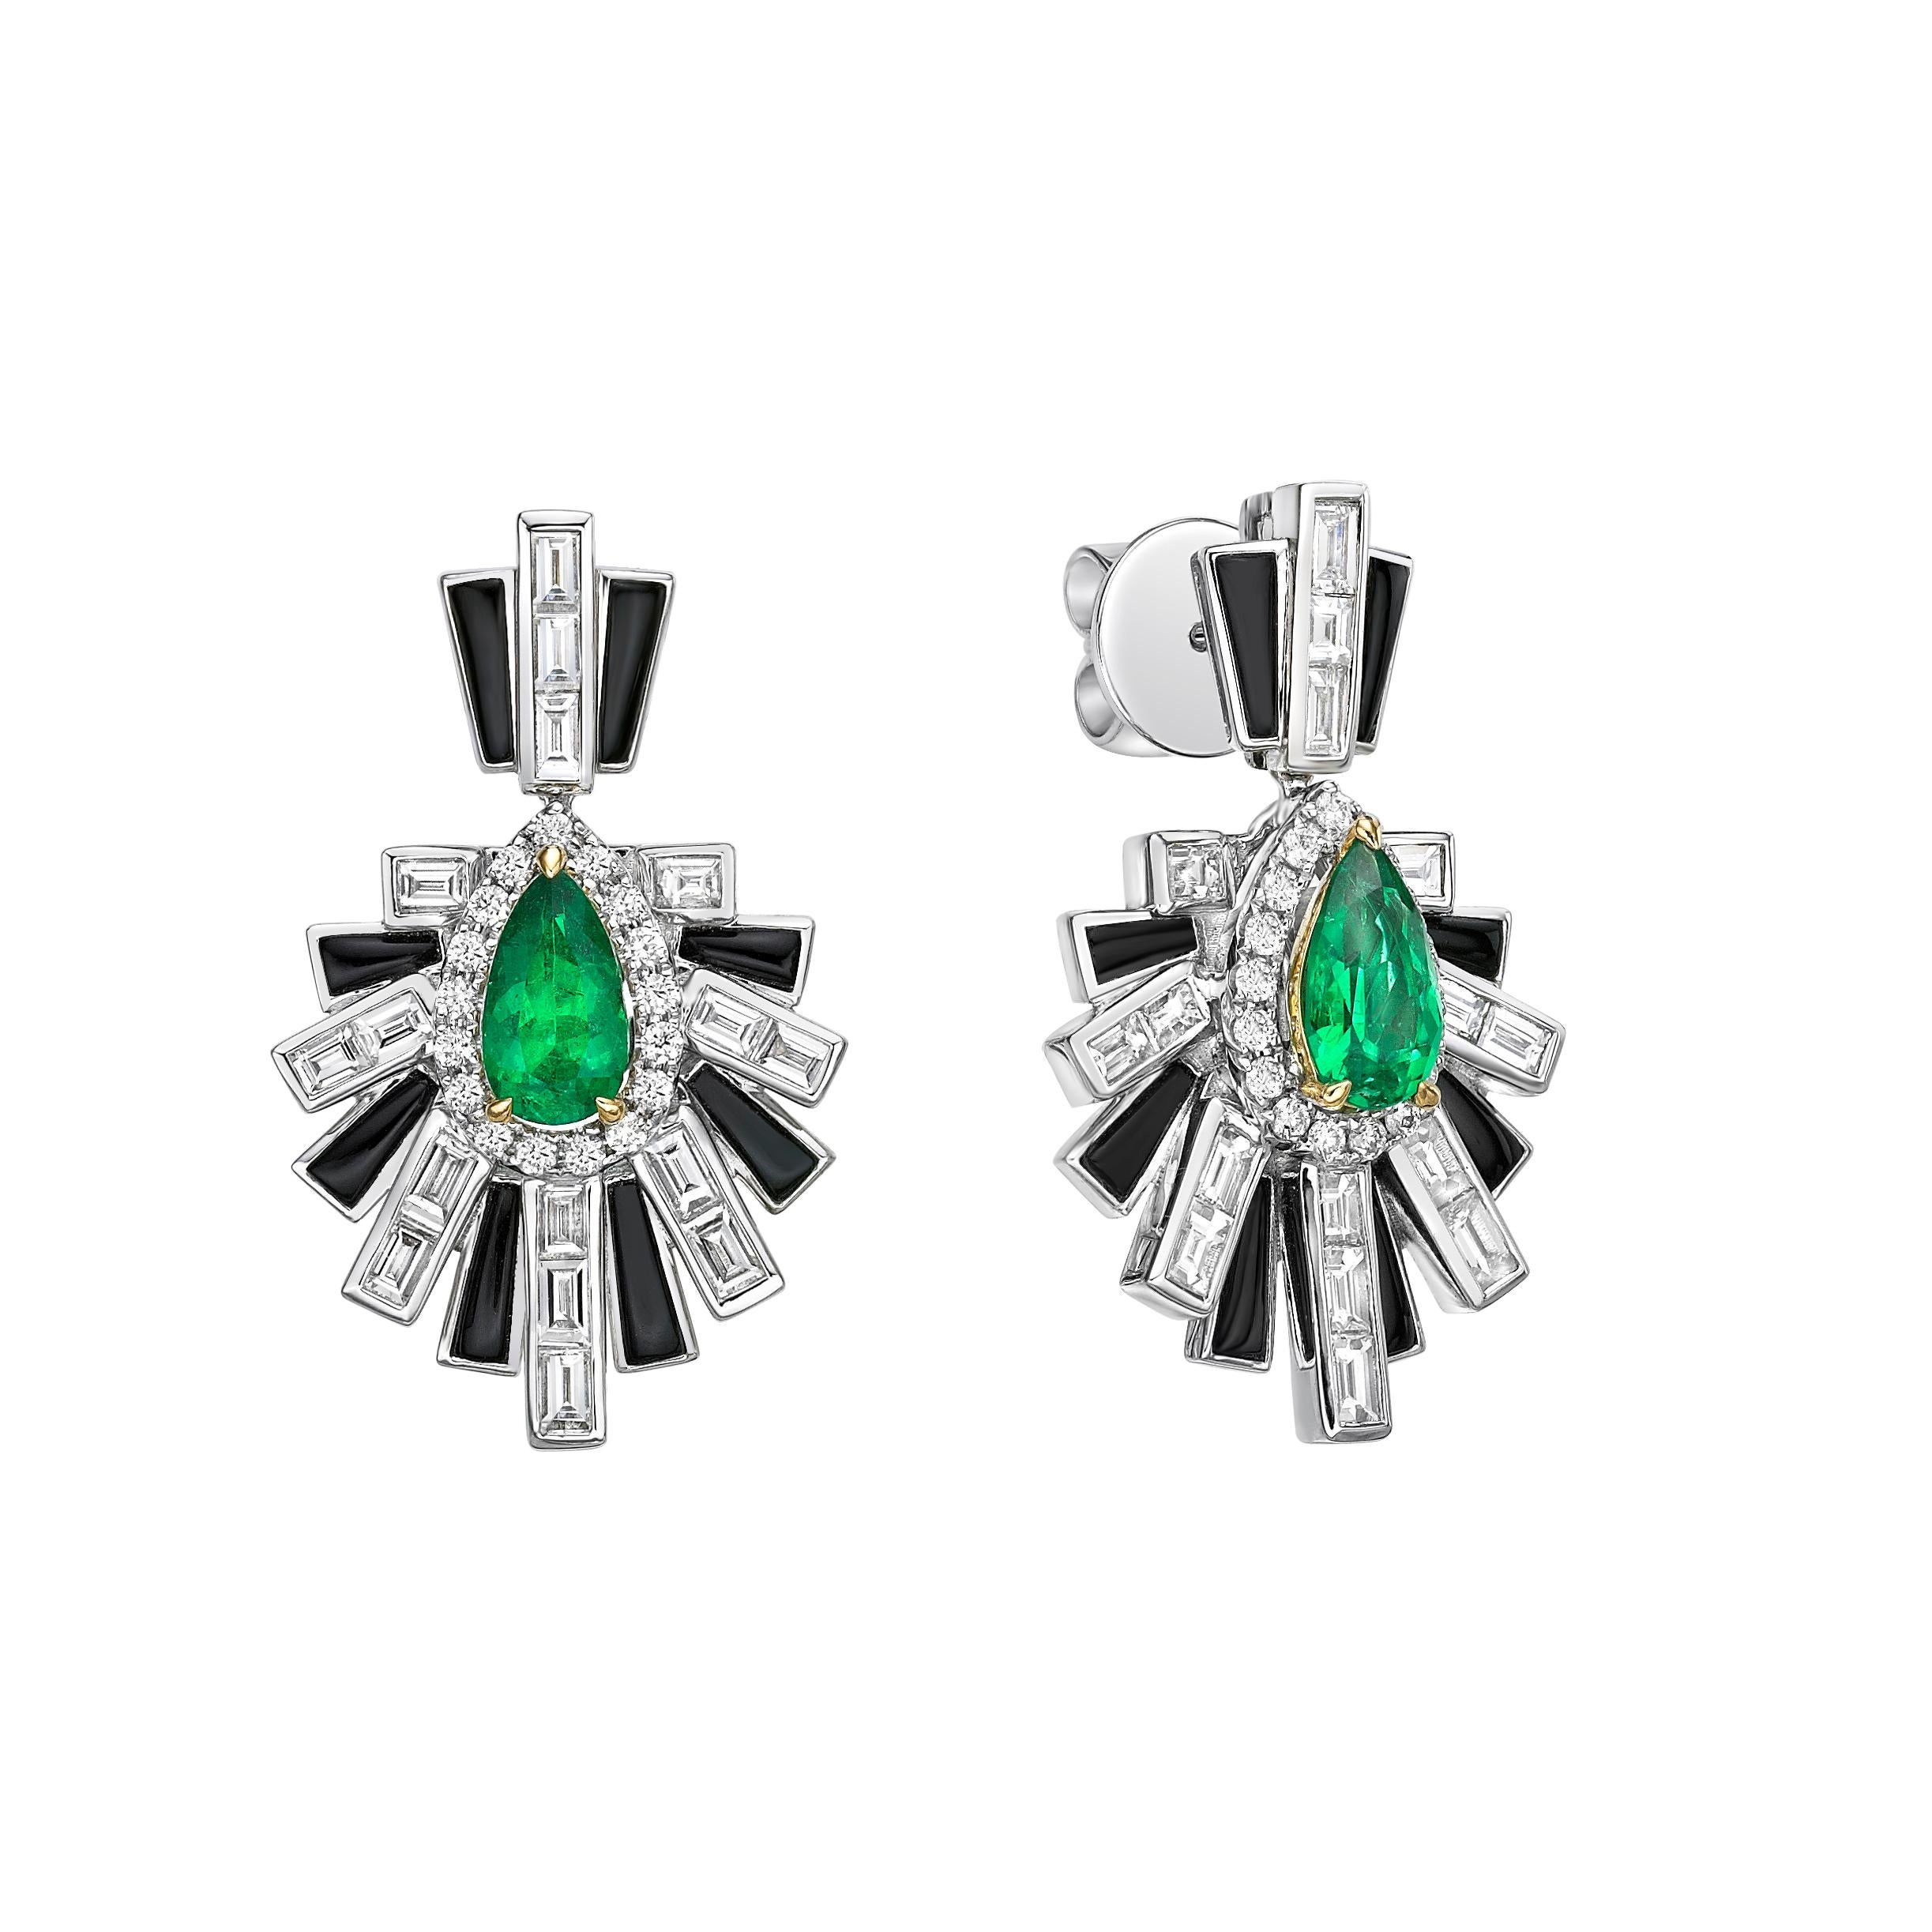 Starburst earrings from our Emerald Art Deco Style Collection. These earrings are beautifully constructed with layers of diamonds and black onyx to elevate the stunning Colombian Emeralds.

Designer emerald earrings in 18K white gold and yellow gold